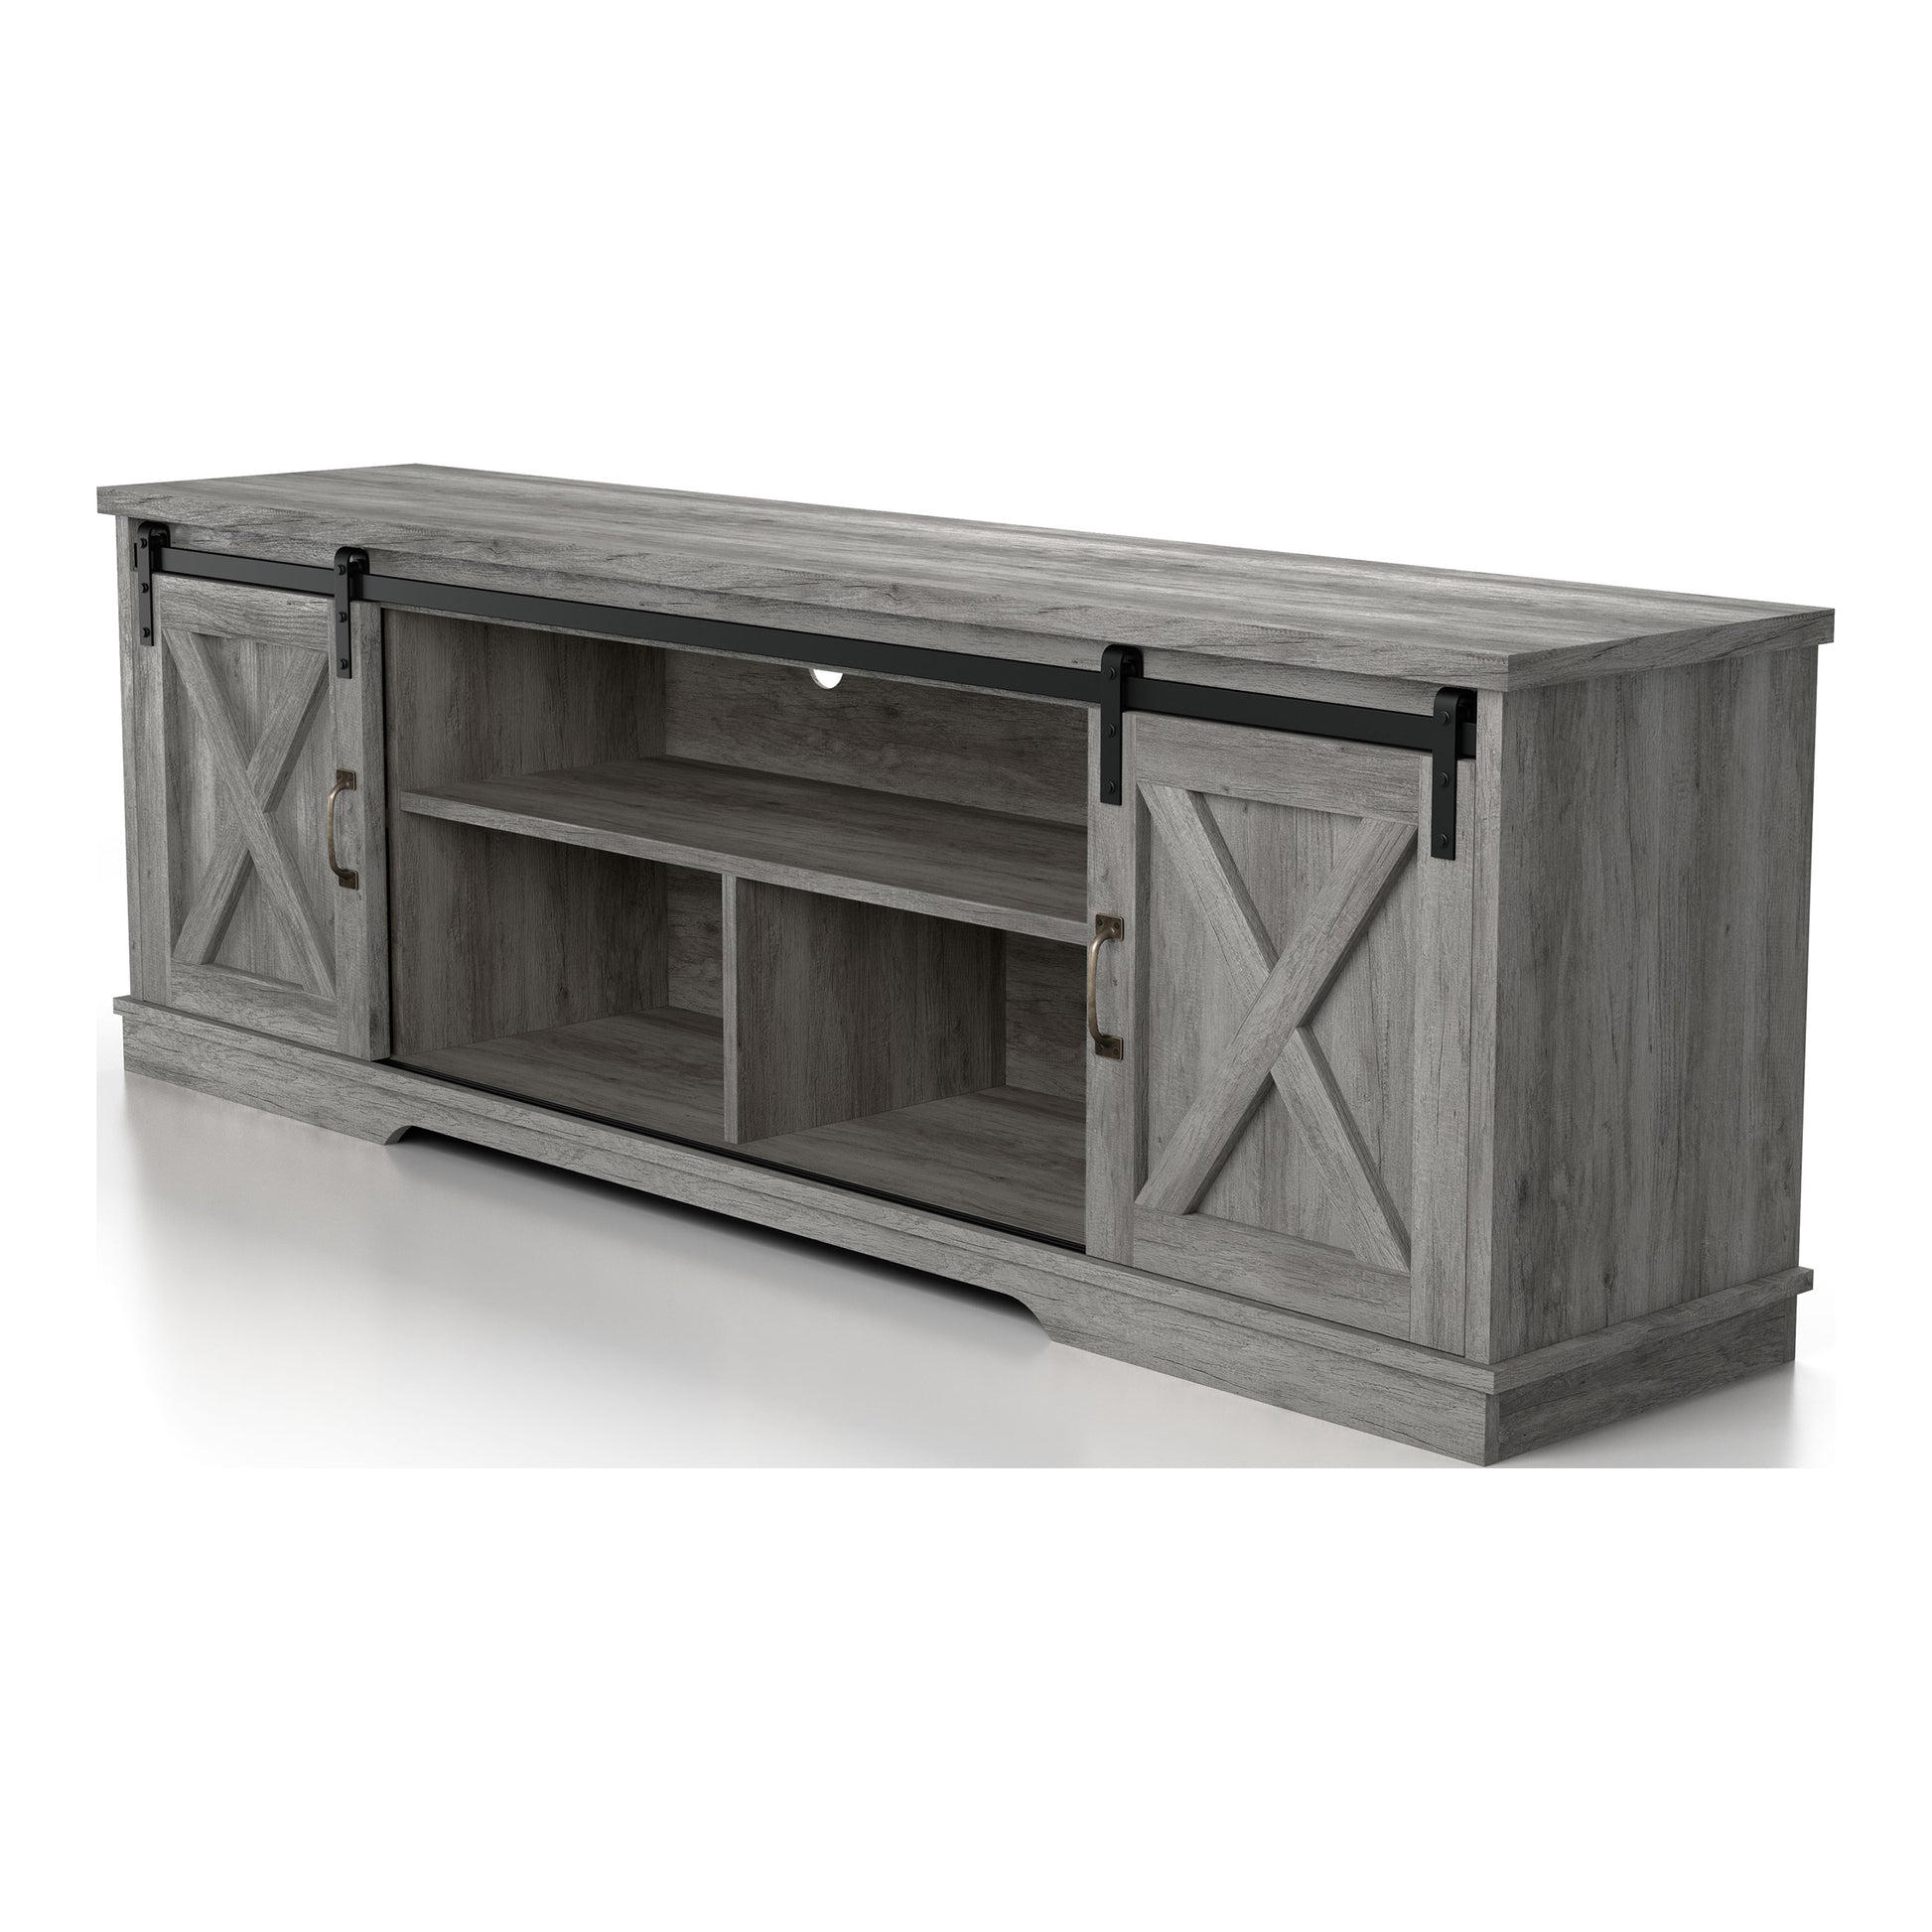 Left angled stand only from a two-piece rustic vintage gray oak TV stand and pier entertainment set on a white background